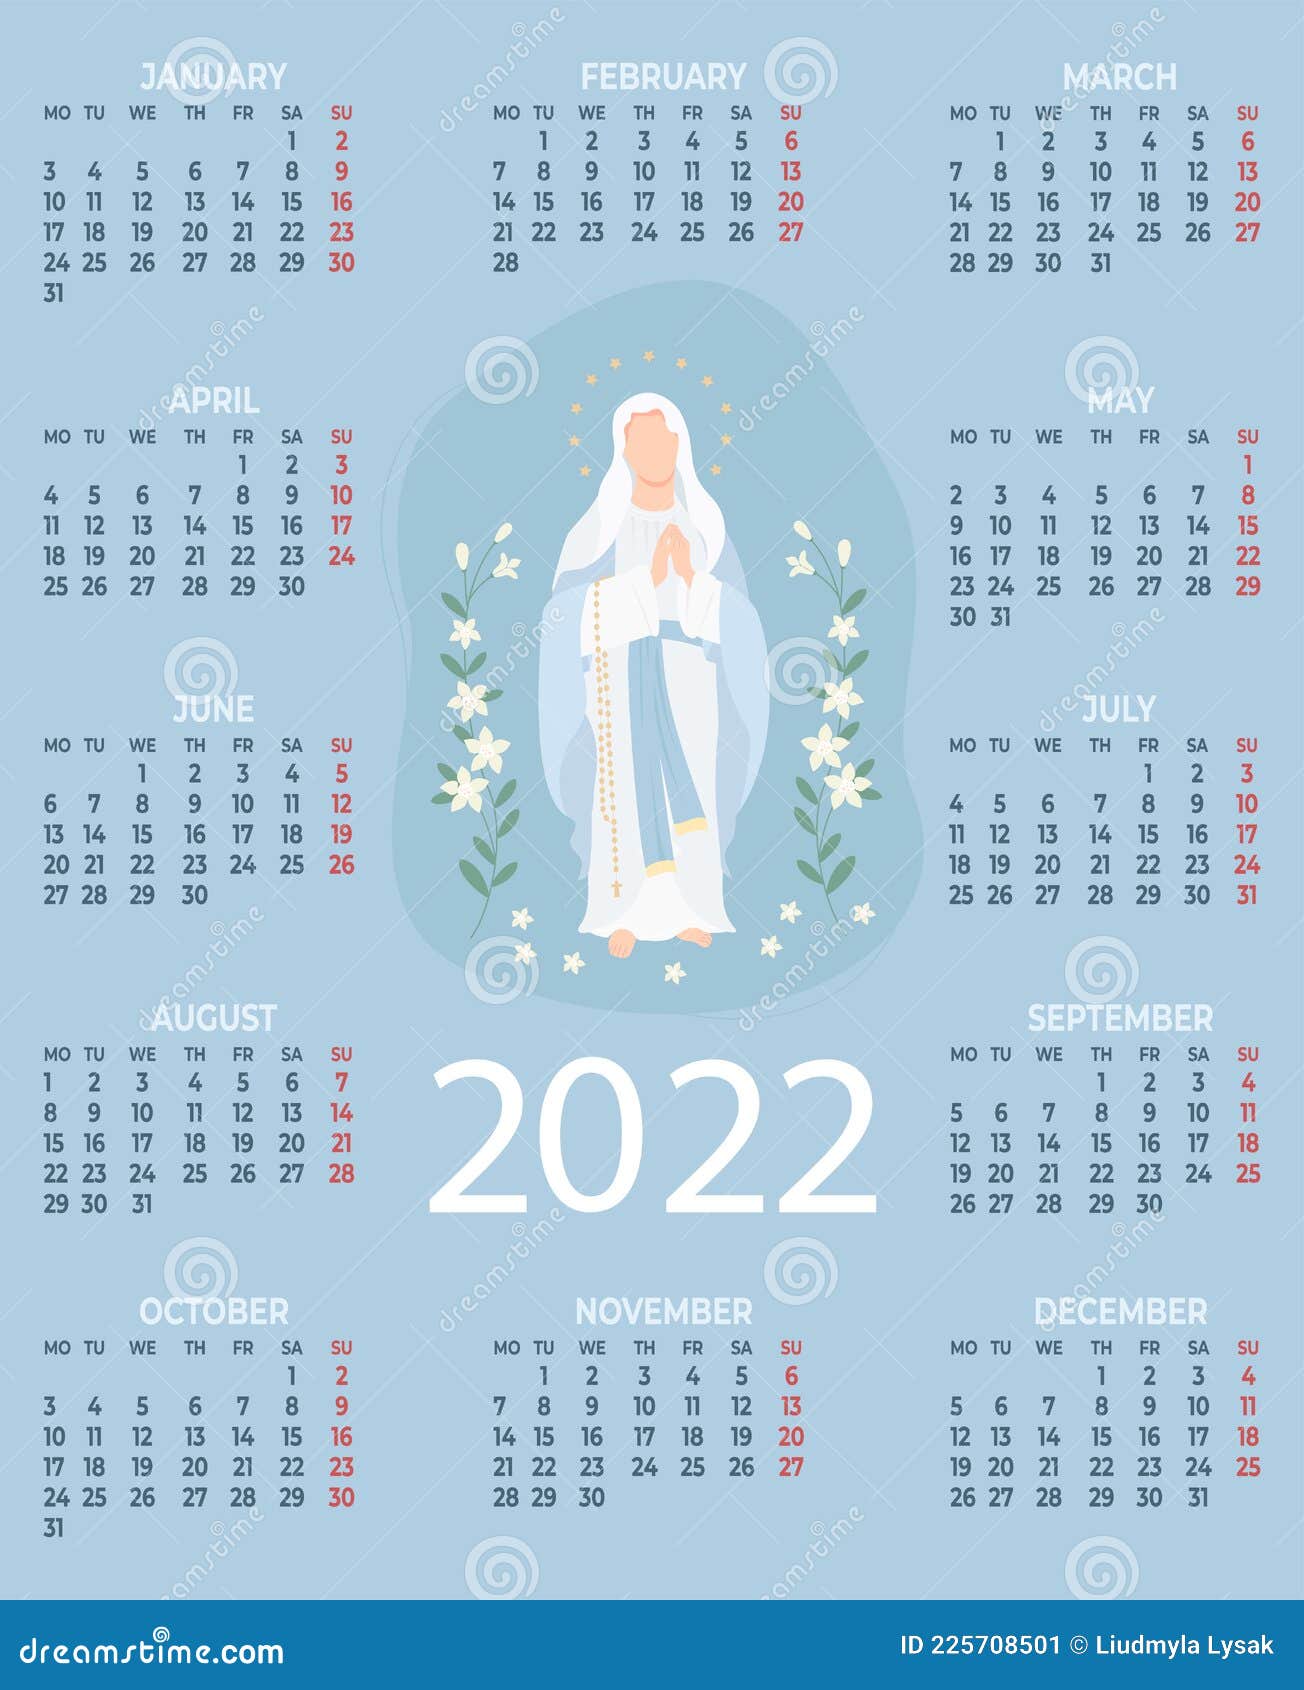 2022 Religious Calendar with the Most Holy Theotokos Queen Heavenly